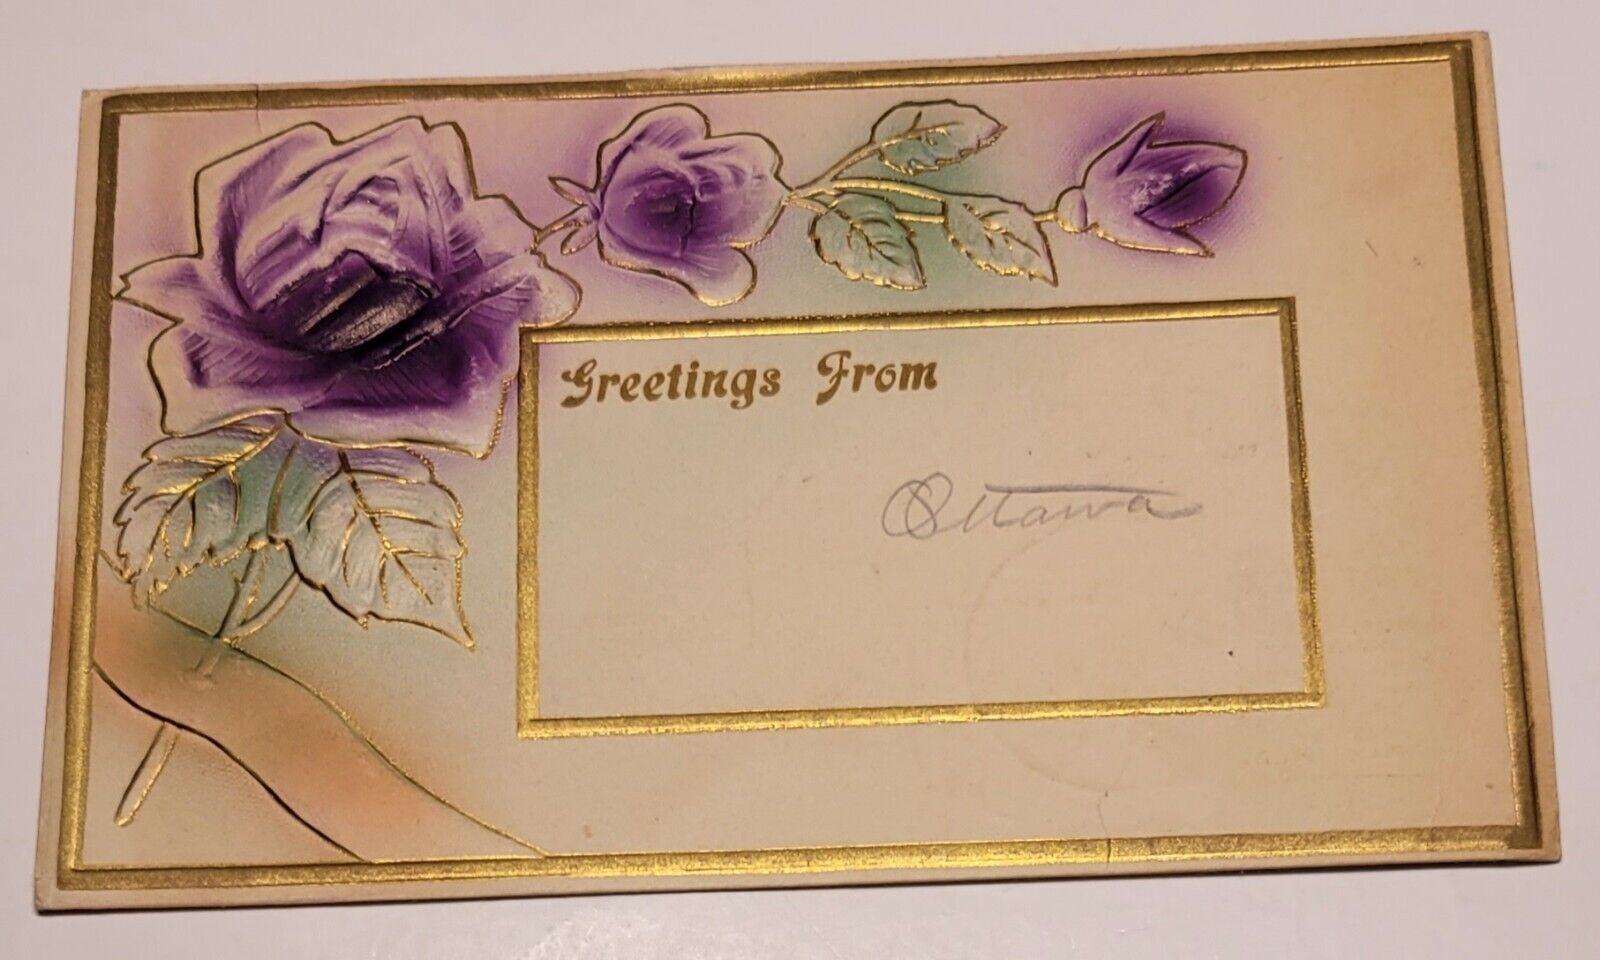 Vintage Post Card ~ Greetings From, Circa 1909 Stamp